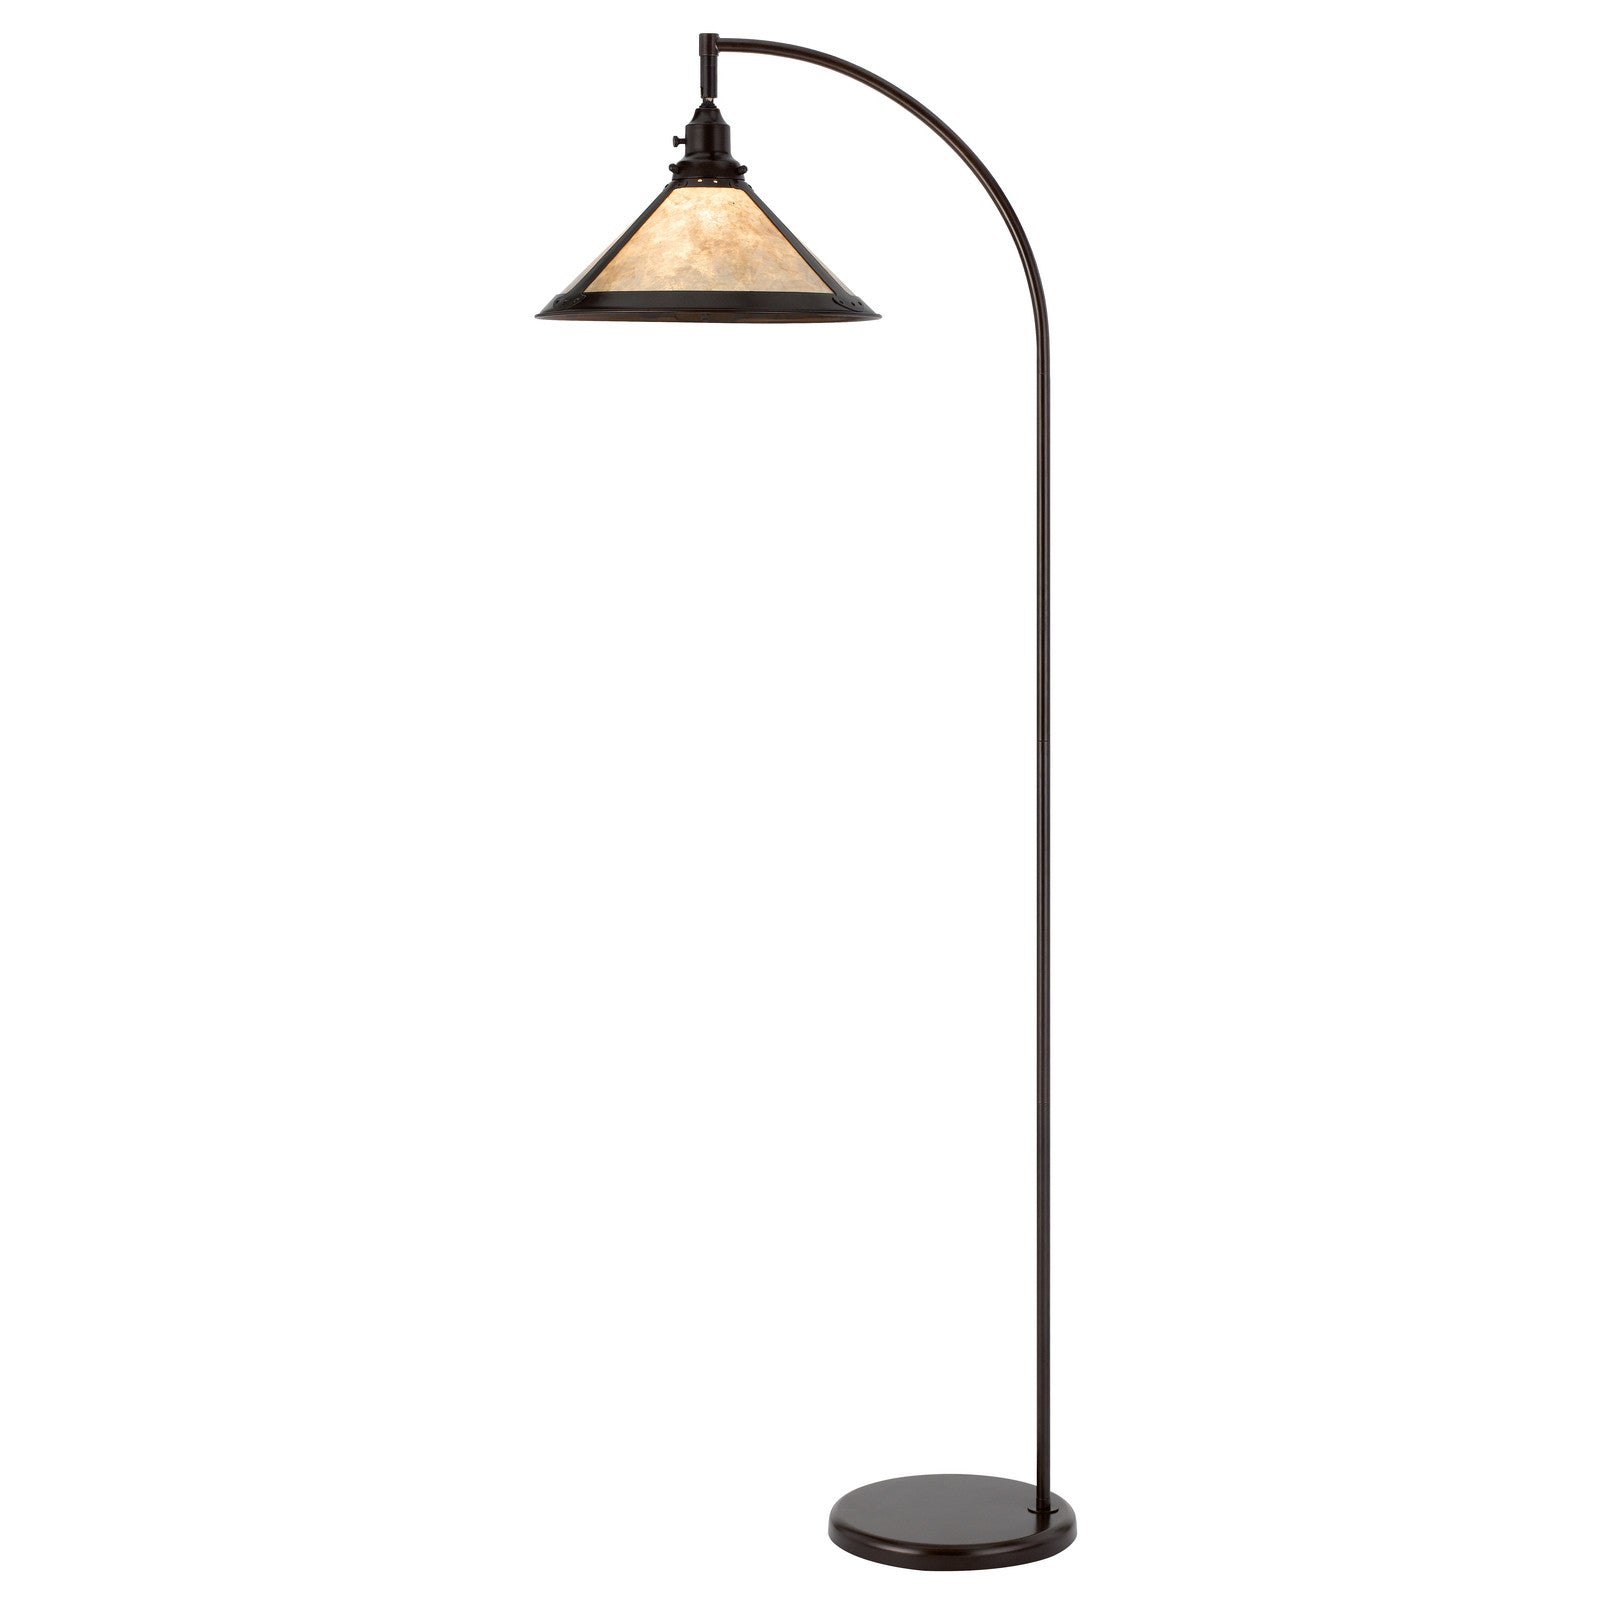 65" Bronze Traditional Shaped Floor Lamp With White Empire Shade